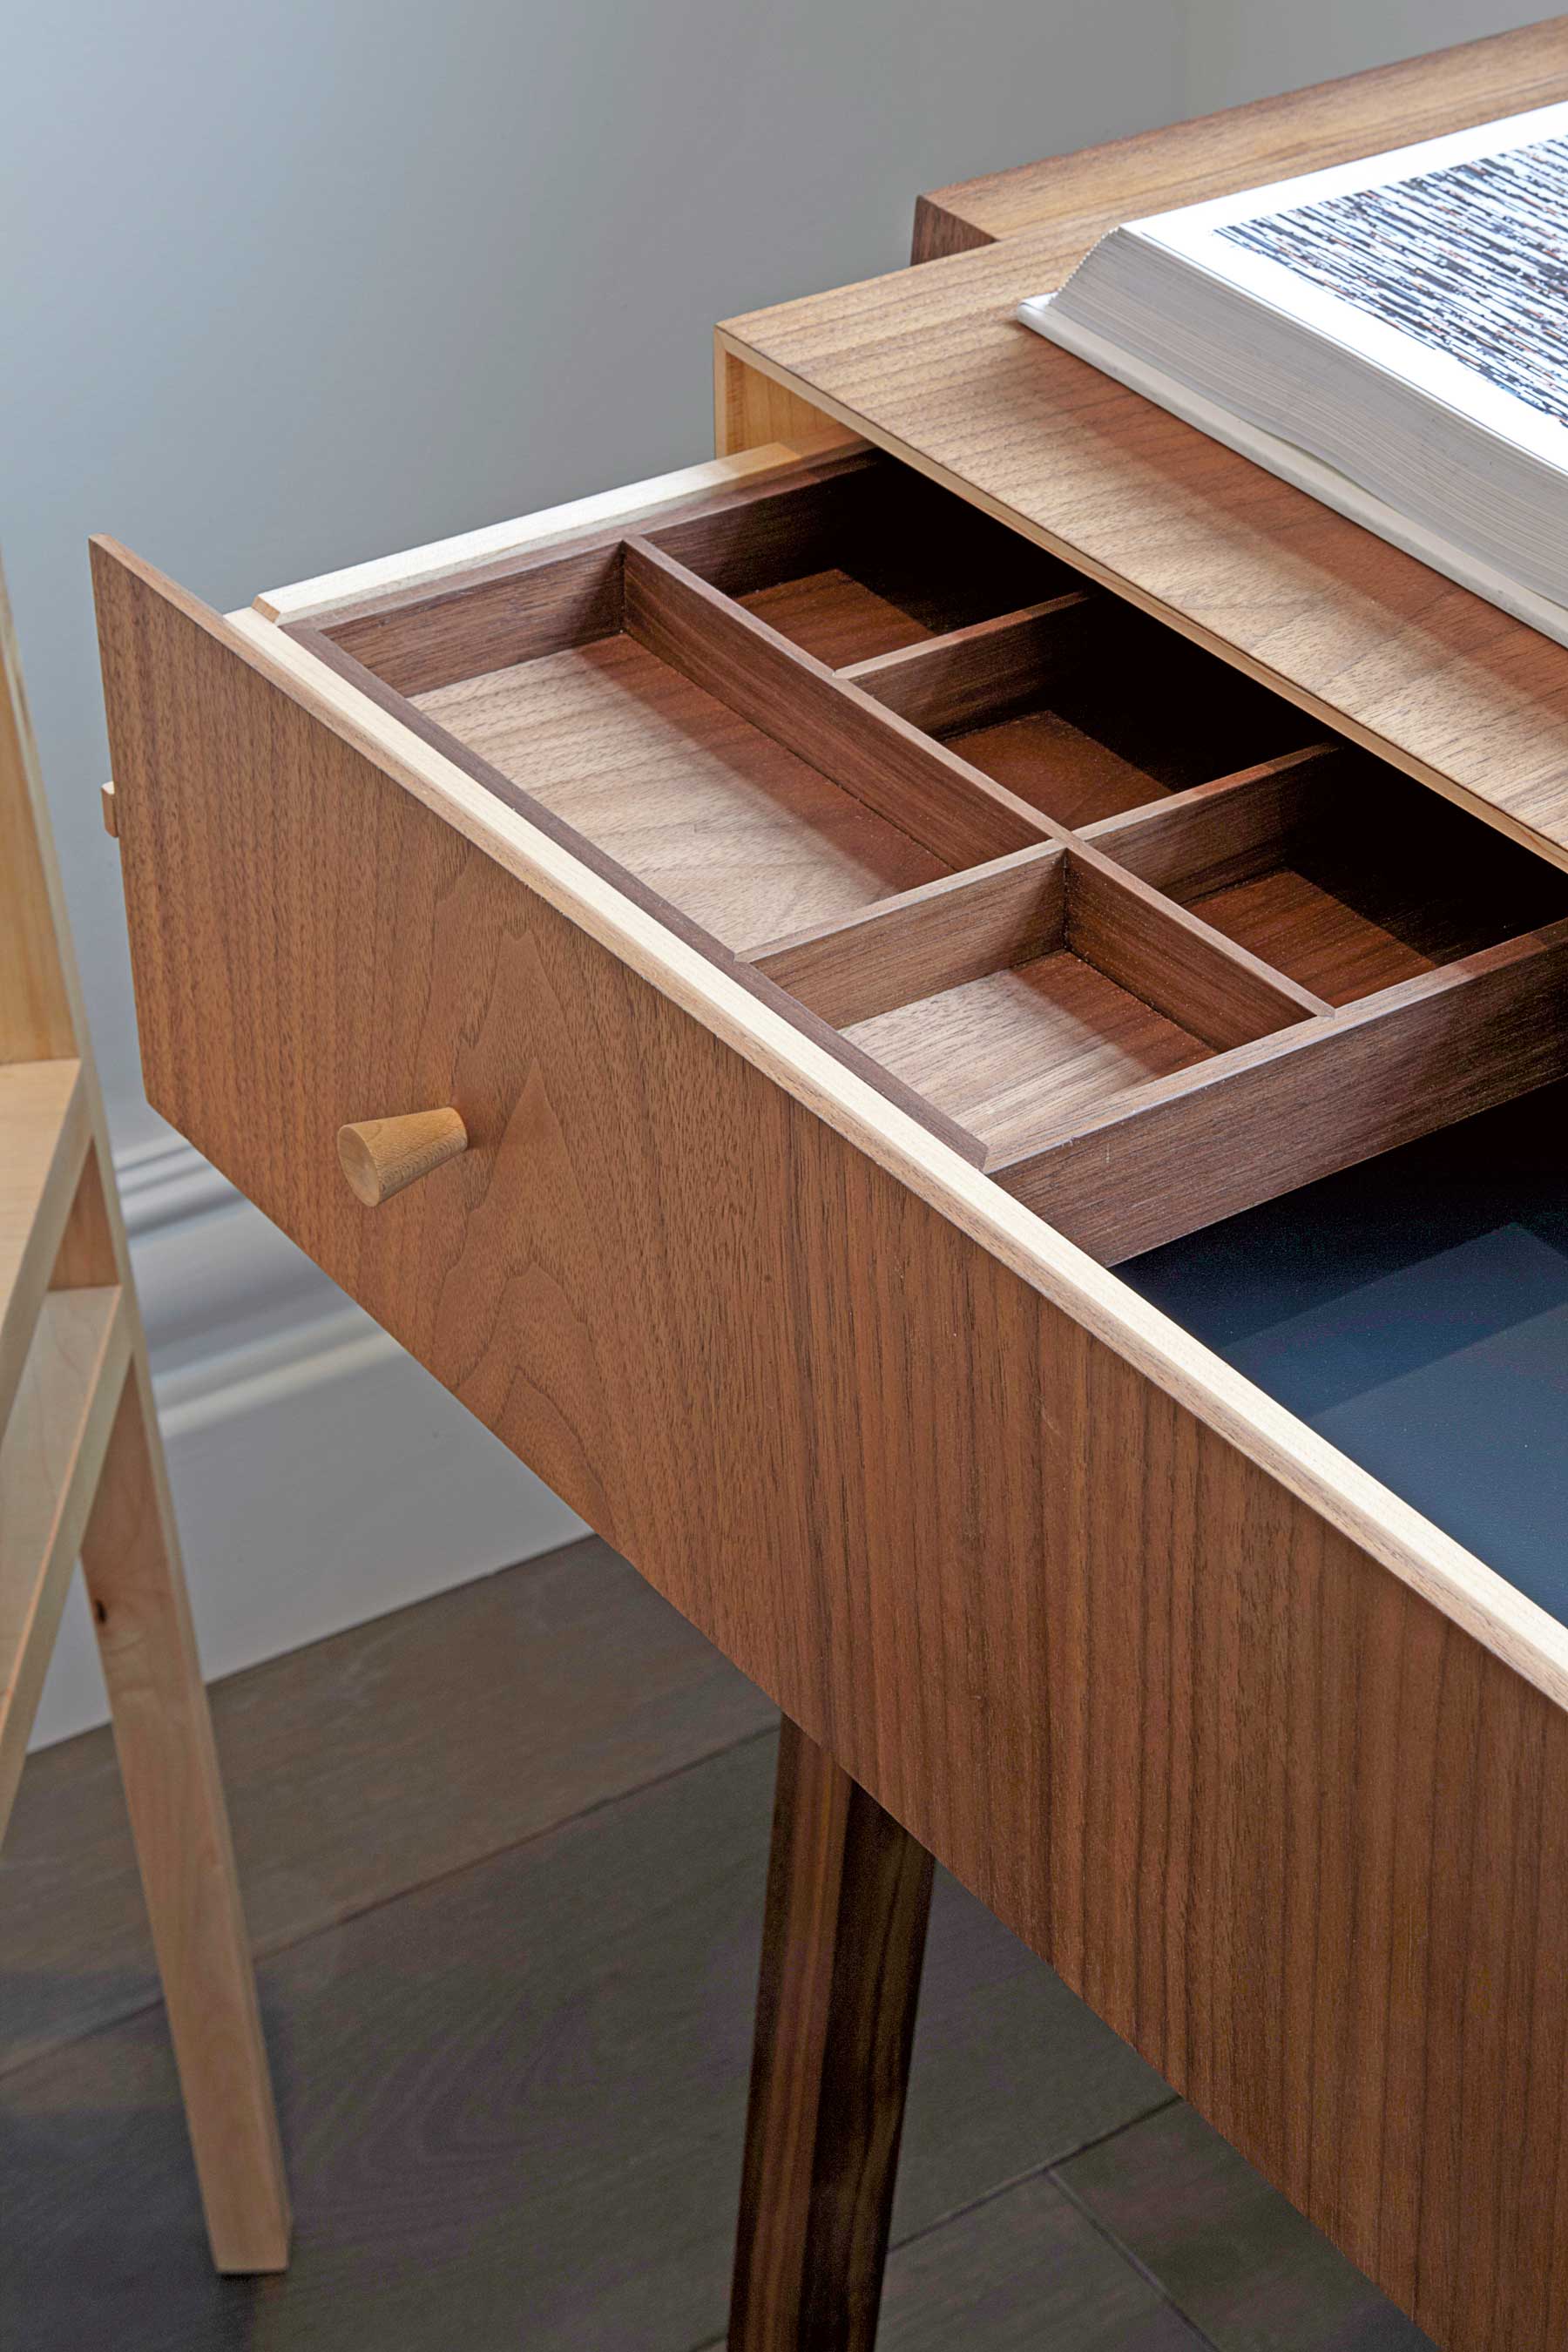 Drawer detail. Desk by Young & Norgate